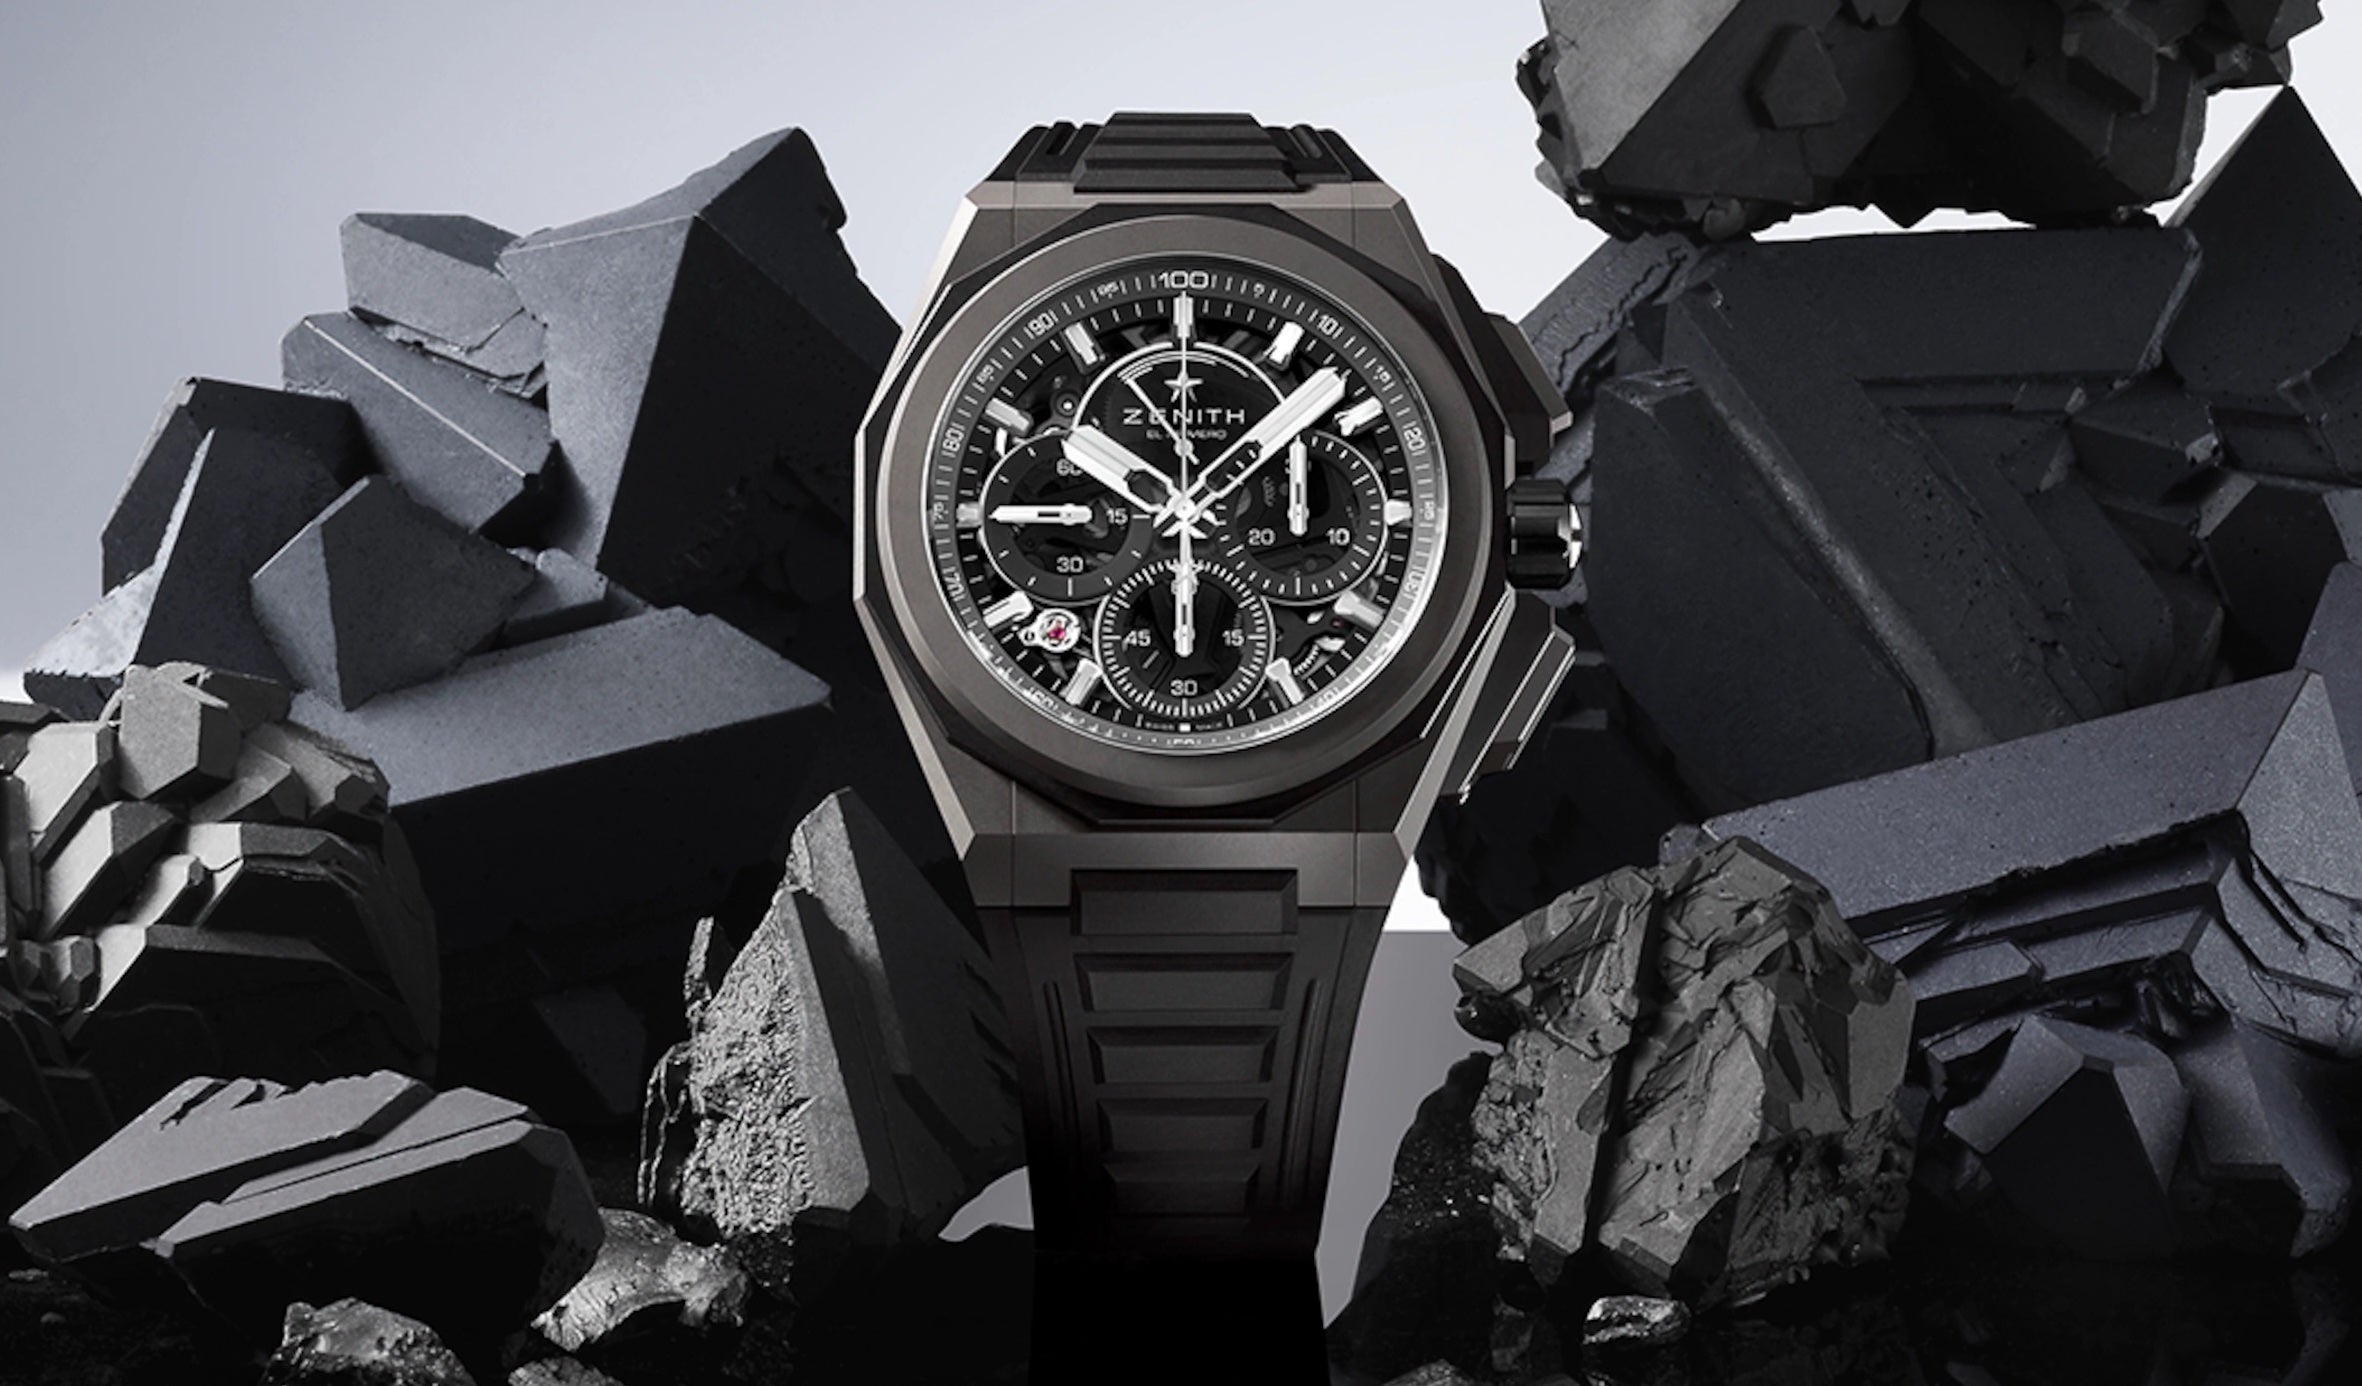 BUILT FOR THE ELEMENTS: ZENITH INTRODUCES THE DEFY EXTREME COLLECTION